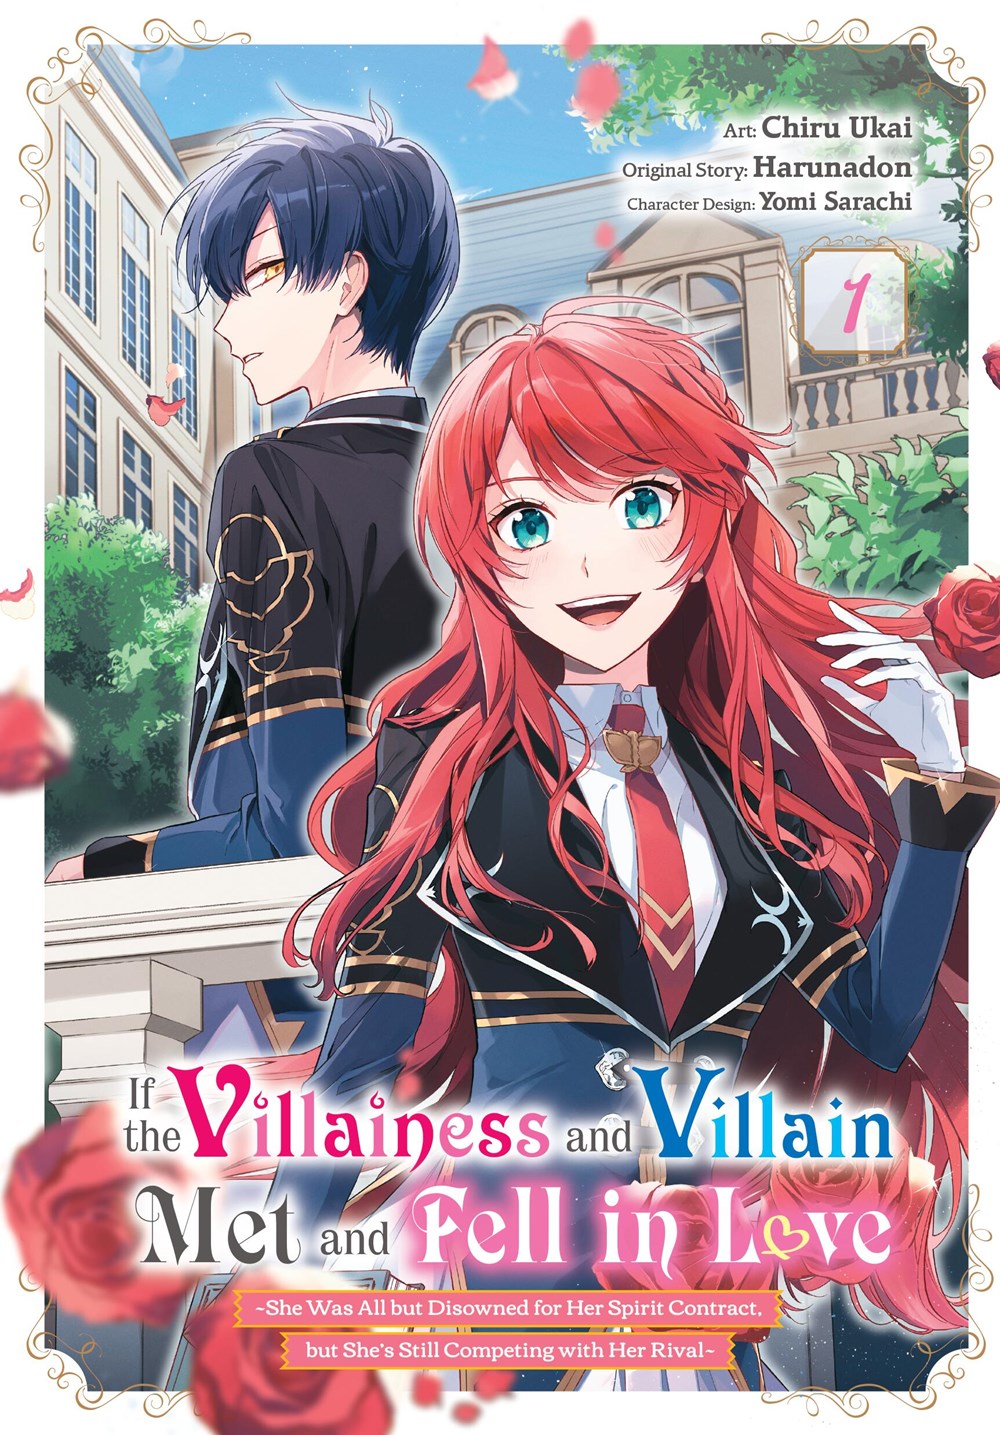 If the Villainess and Villain Met and Fell in Love Manga Volume 1 image count 0